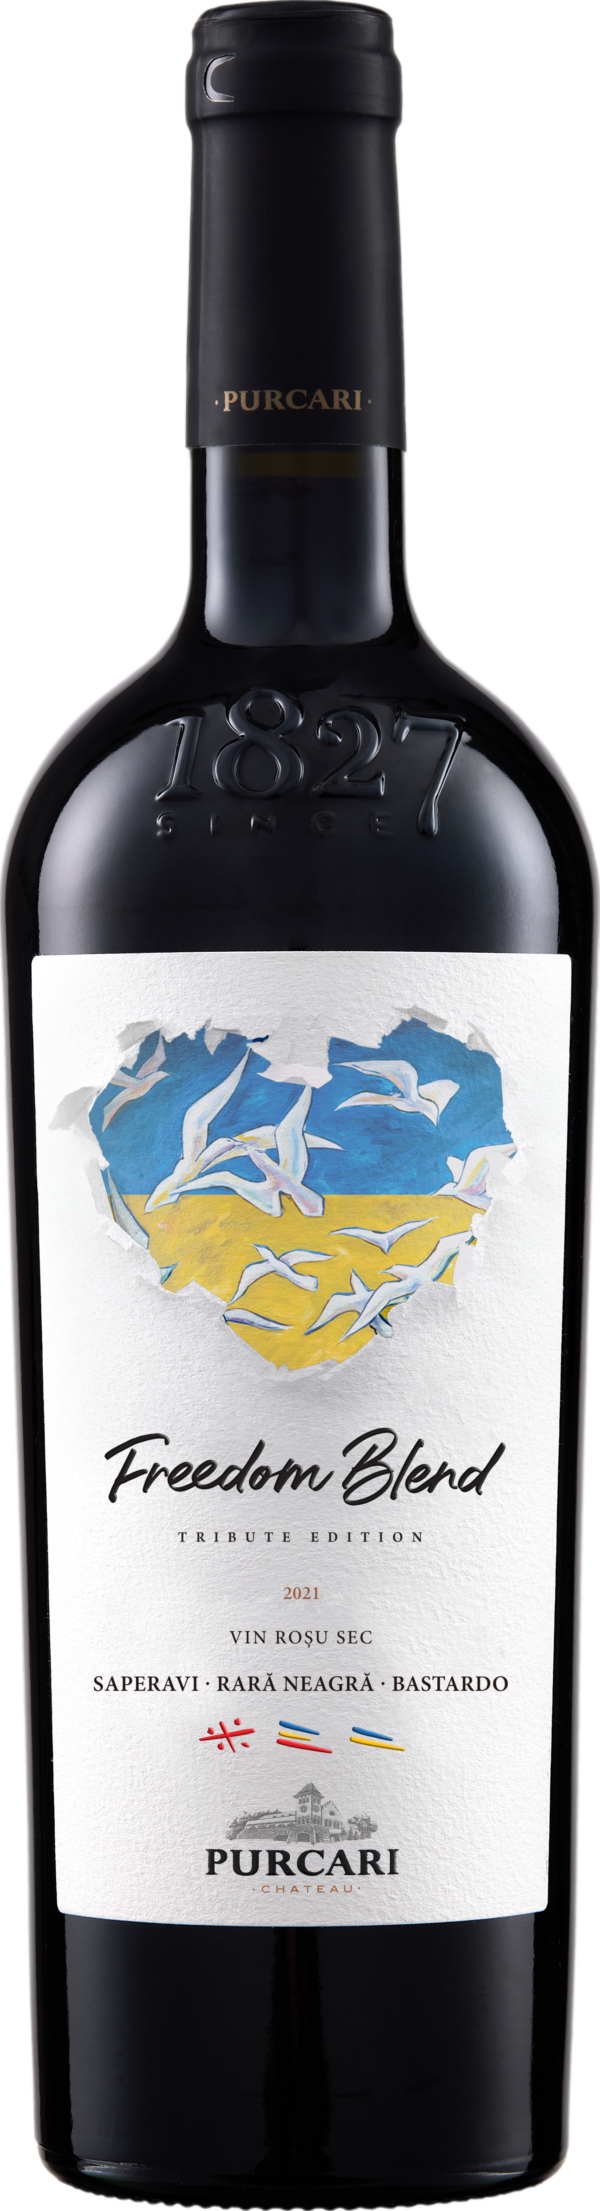 Product image of Chateau Purcari Freedom Blend 2022 from 8wines